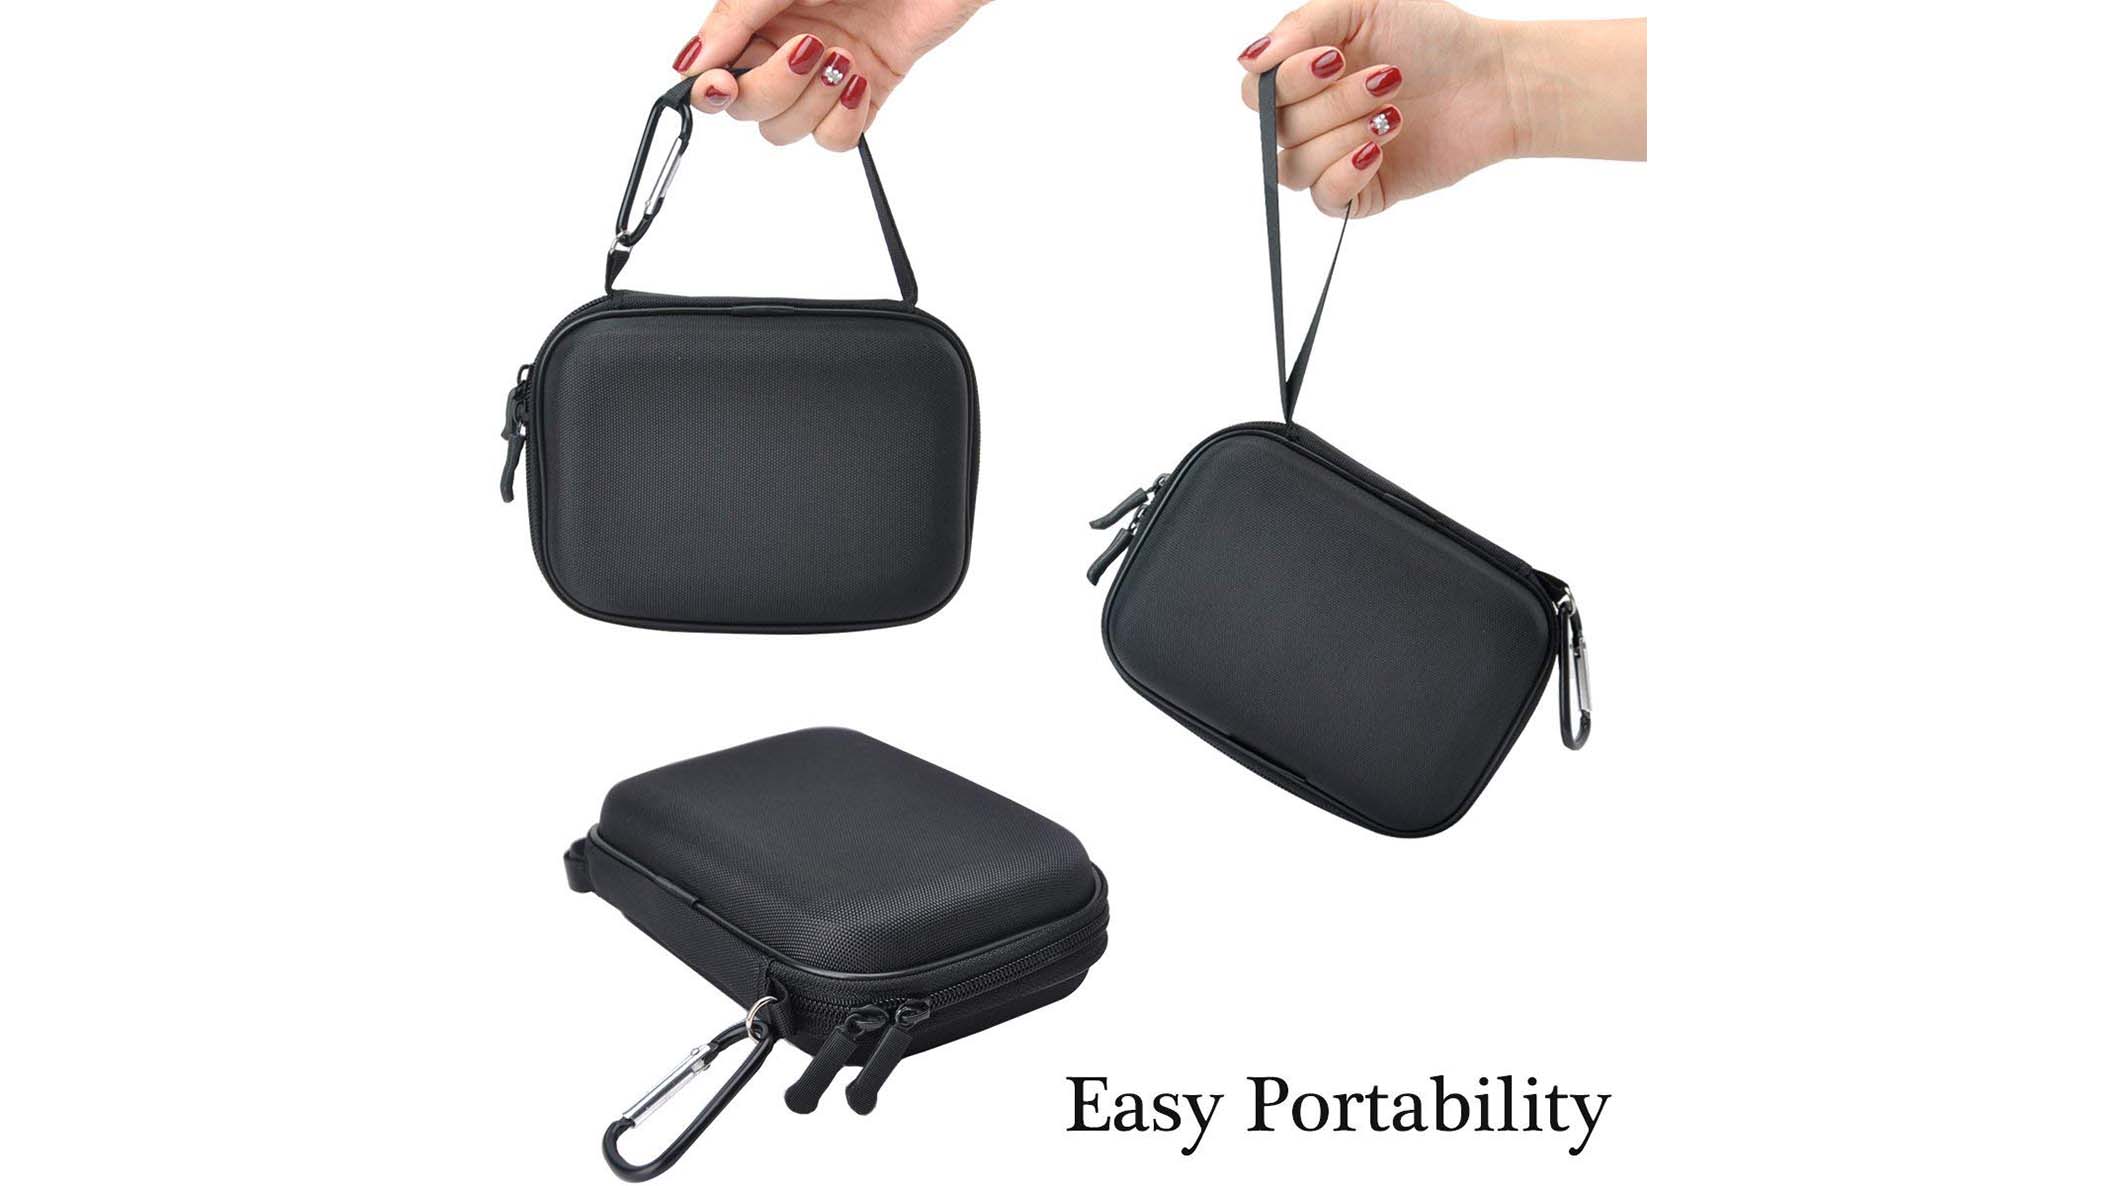 Prosperity headphone carry pouch for sale for brushes-4